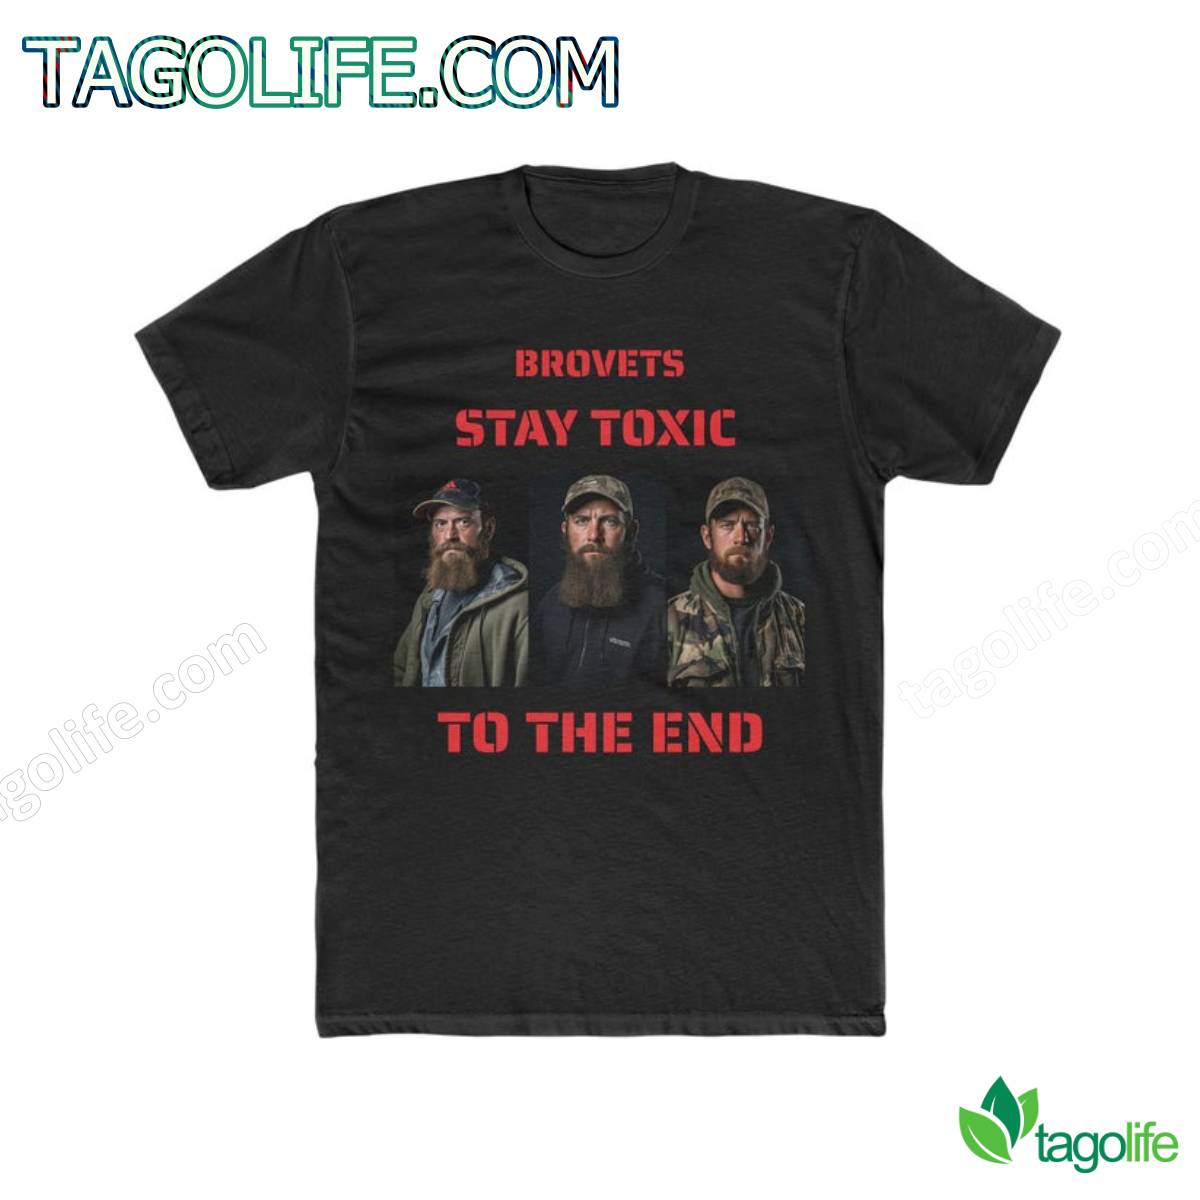 Brovets Stay Toxic To The End T-shirt - Tagolife